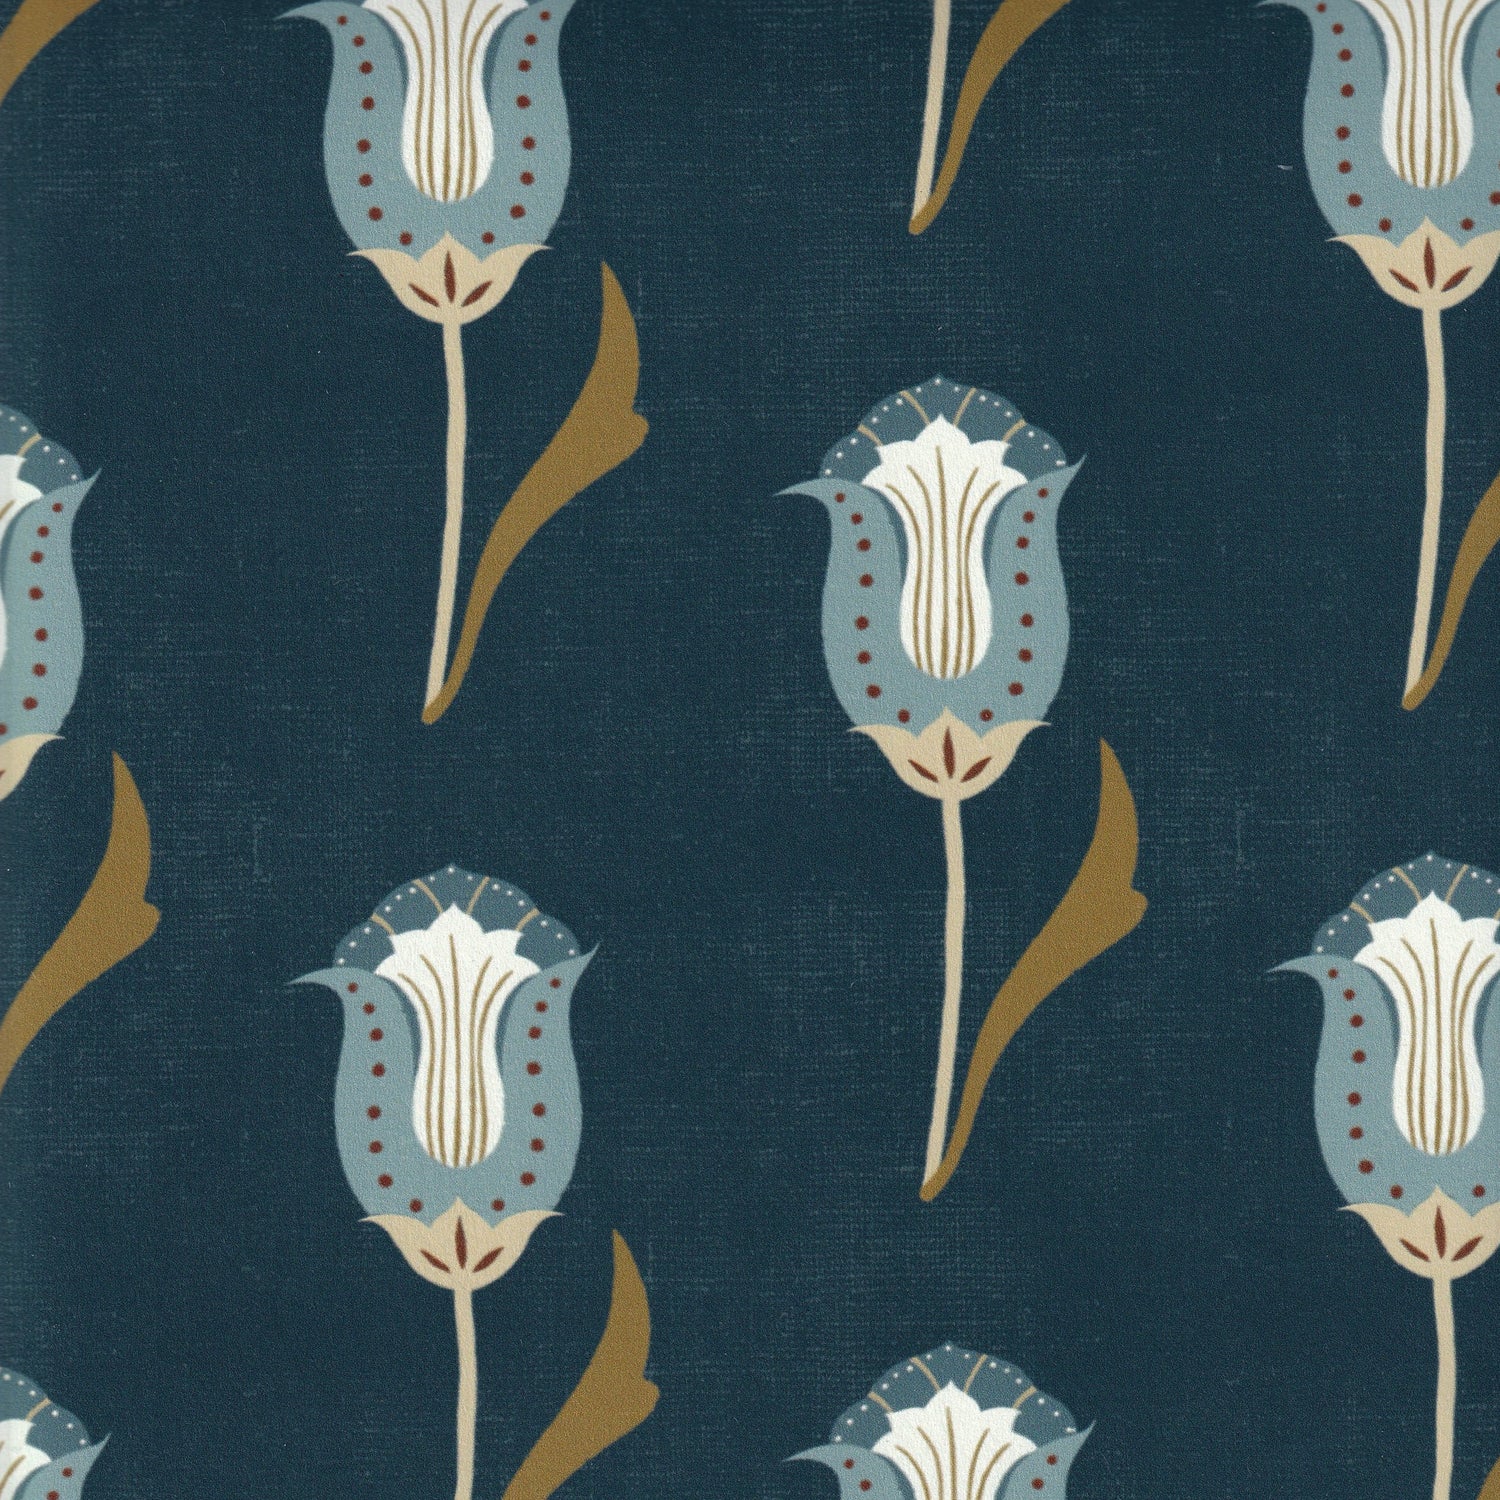 Abstract floral dark and light blue wallpaper swatch